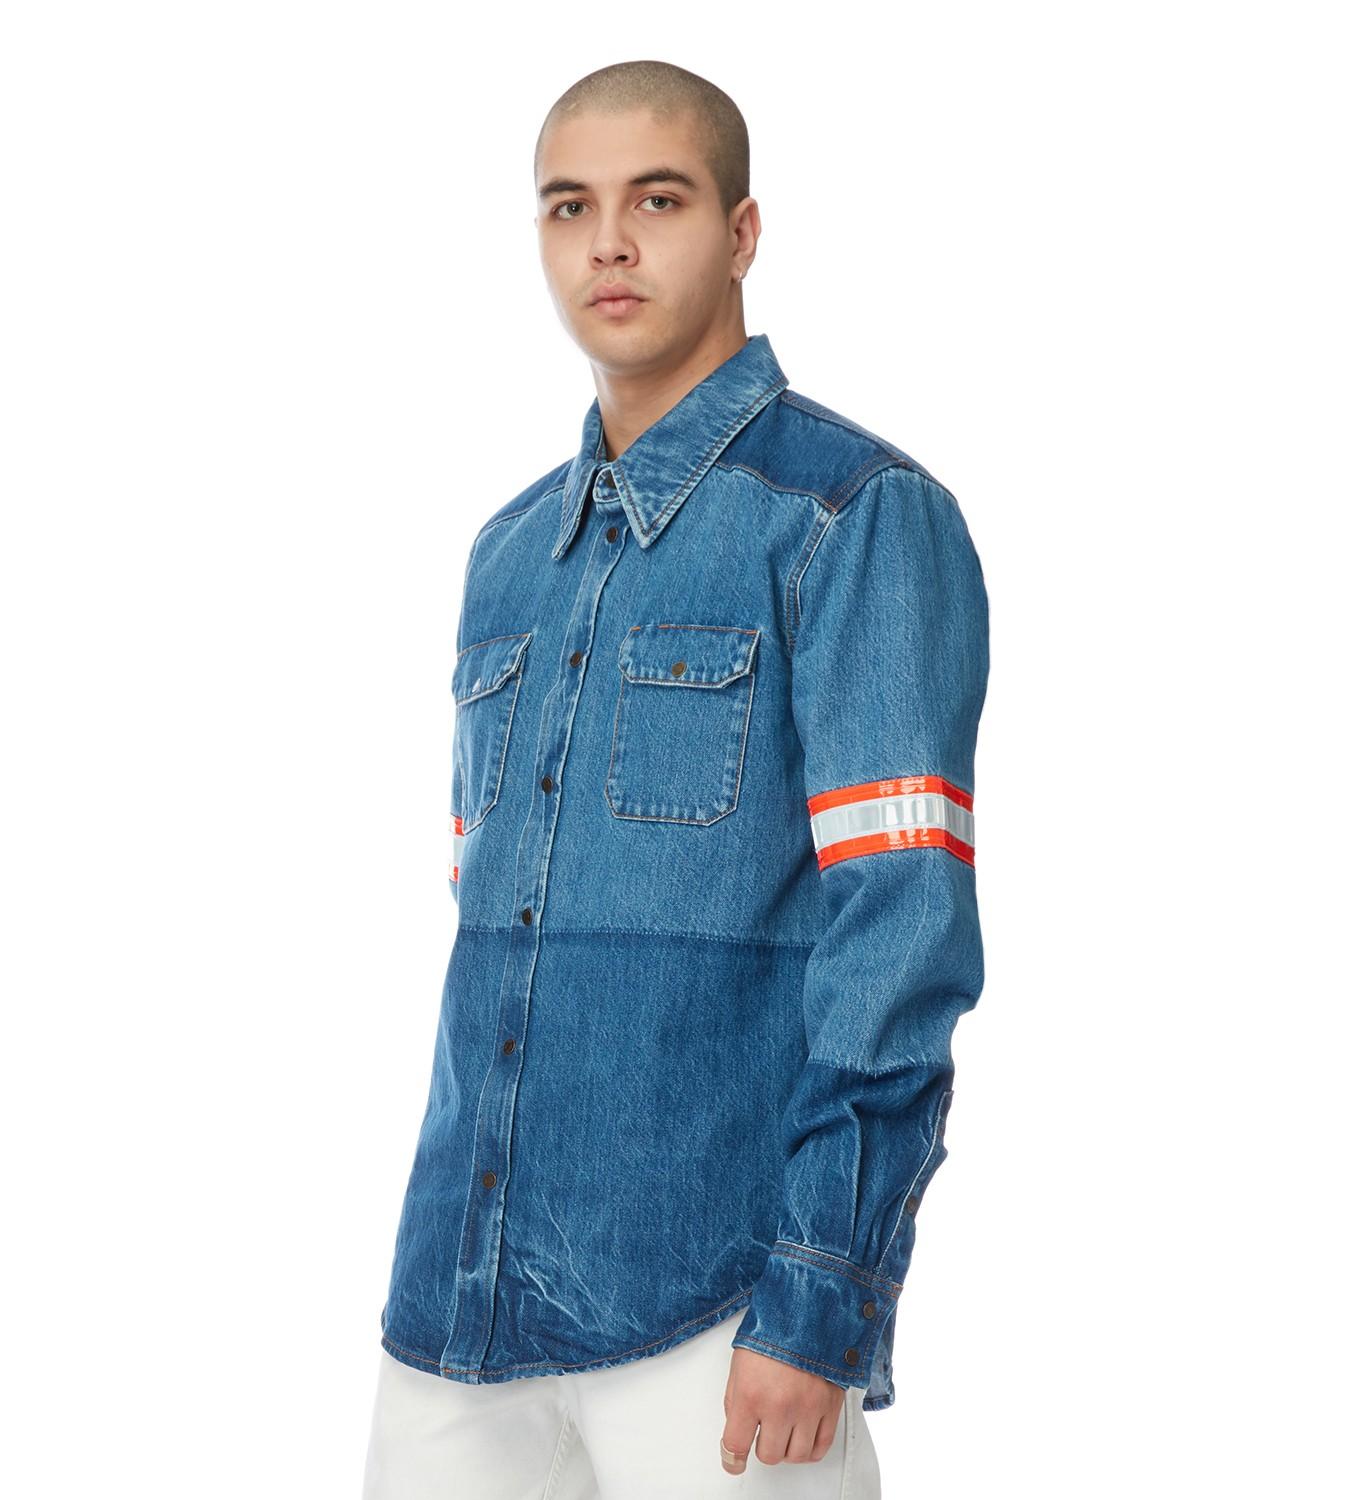 calvin klein 205w39nyc denim shirt Cheaper Than Retail Price> Buy Clothing,  Accessories and lifestyle products for women & men -